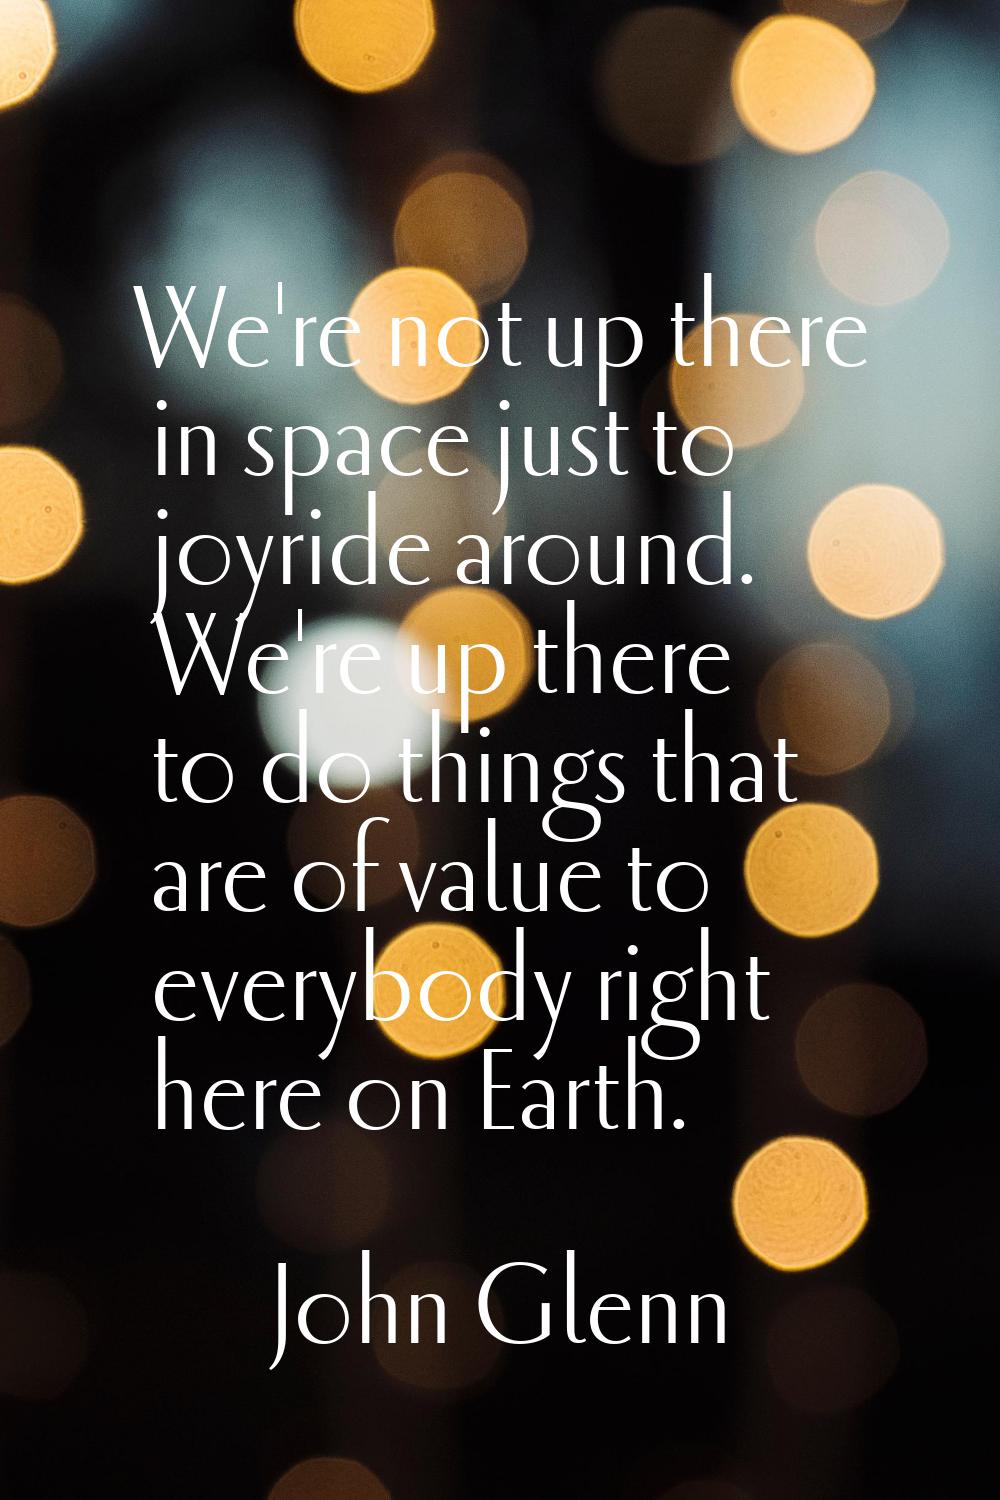 We're not up there in space just to joyride around. We're up there to do things that are of value t